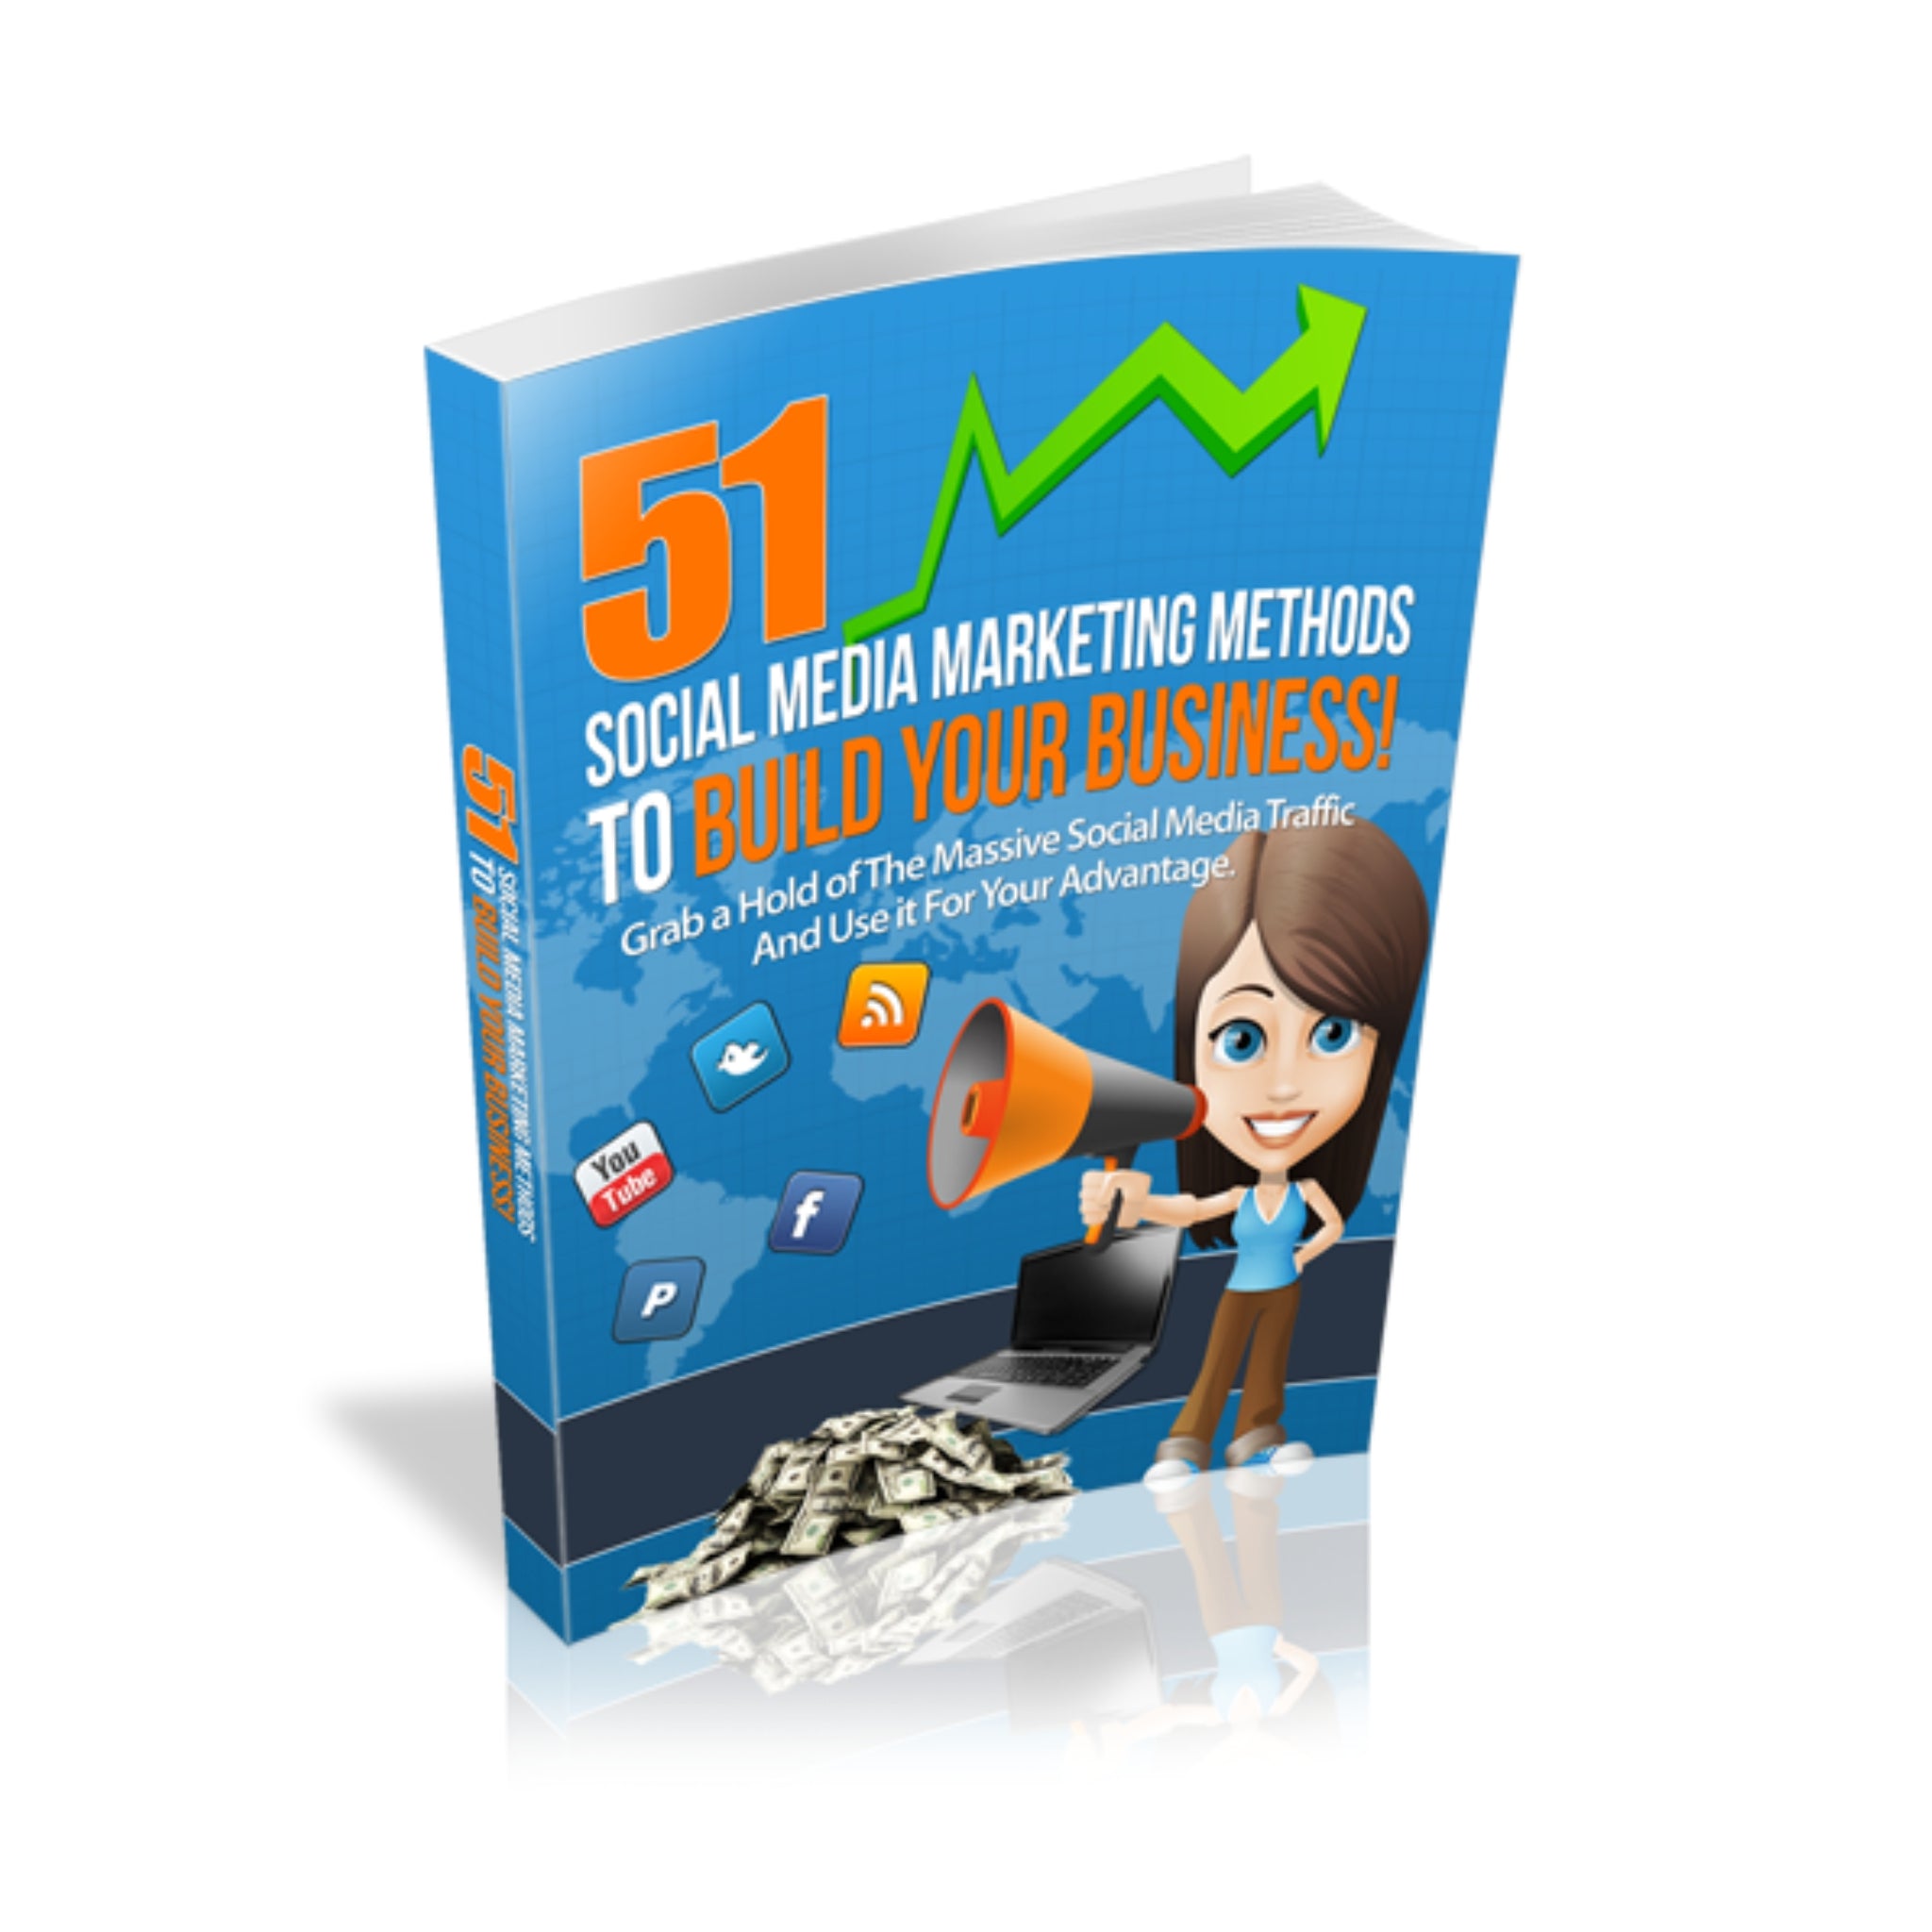 51 Social Media Marketing Methods To Build Your Business Ebook